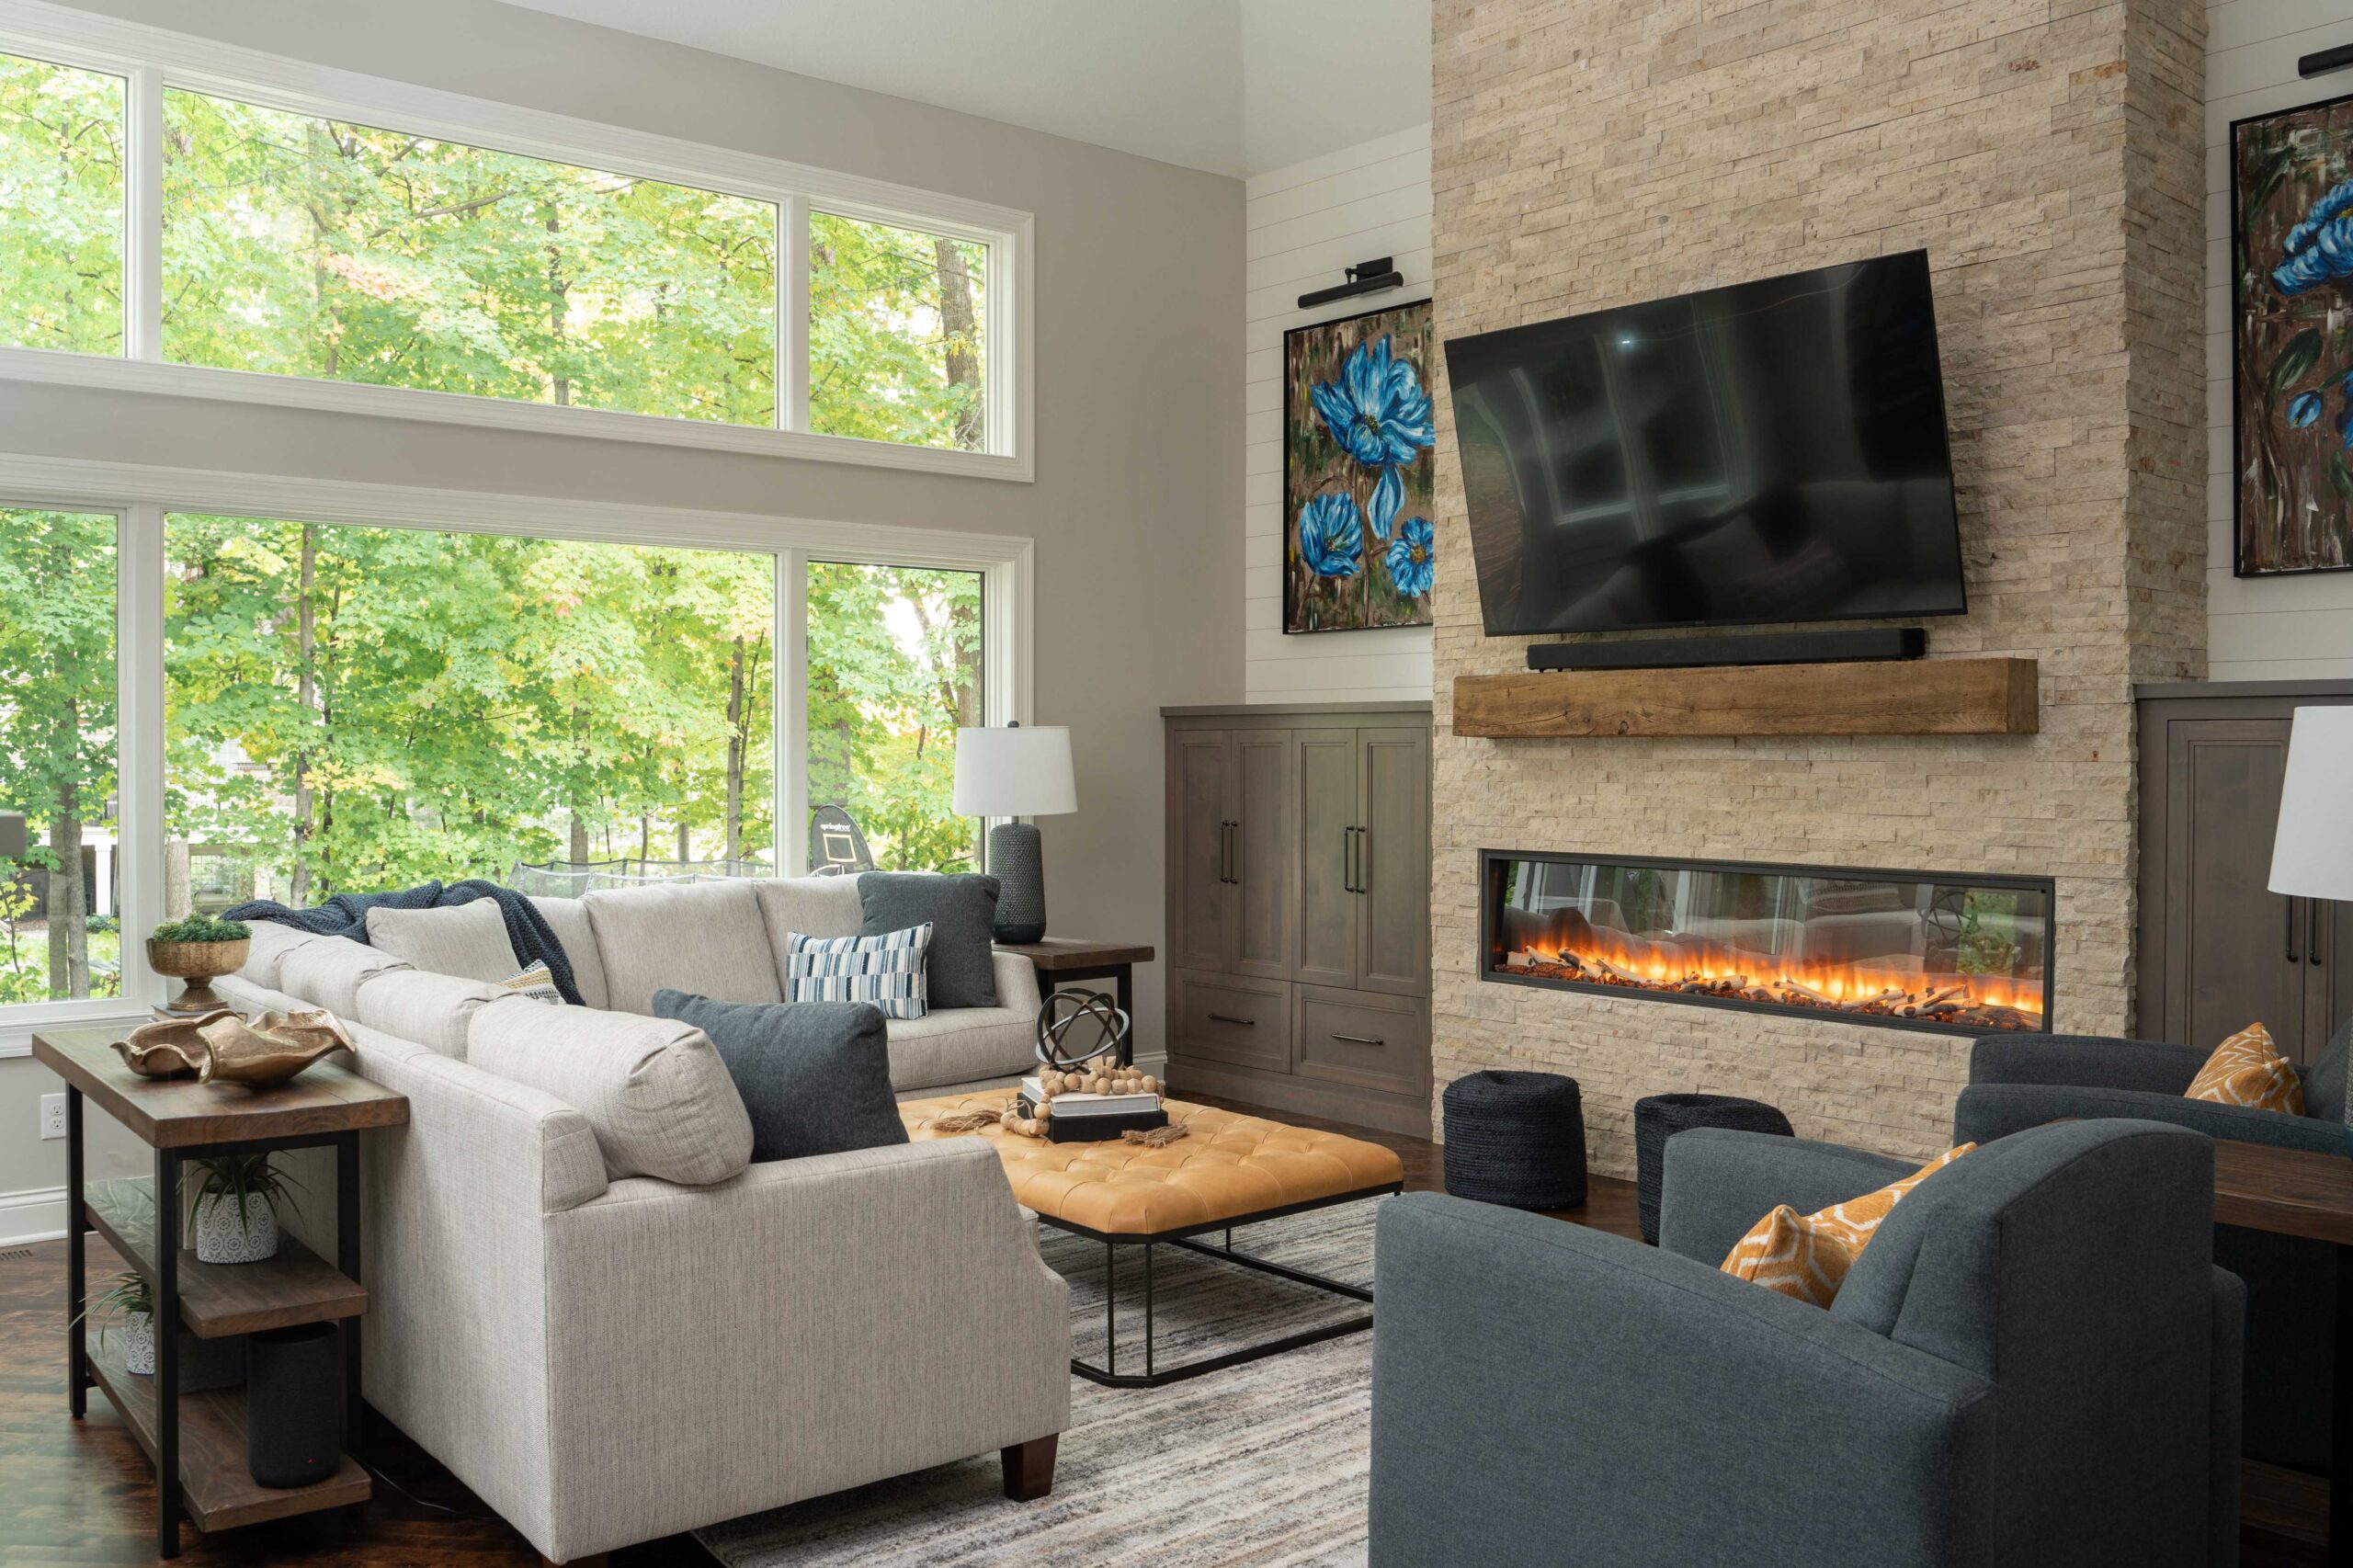 Great Waters Alcove Remodel: A cozy living room with a fireplace and TV.